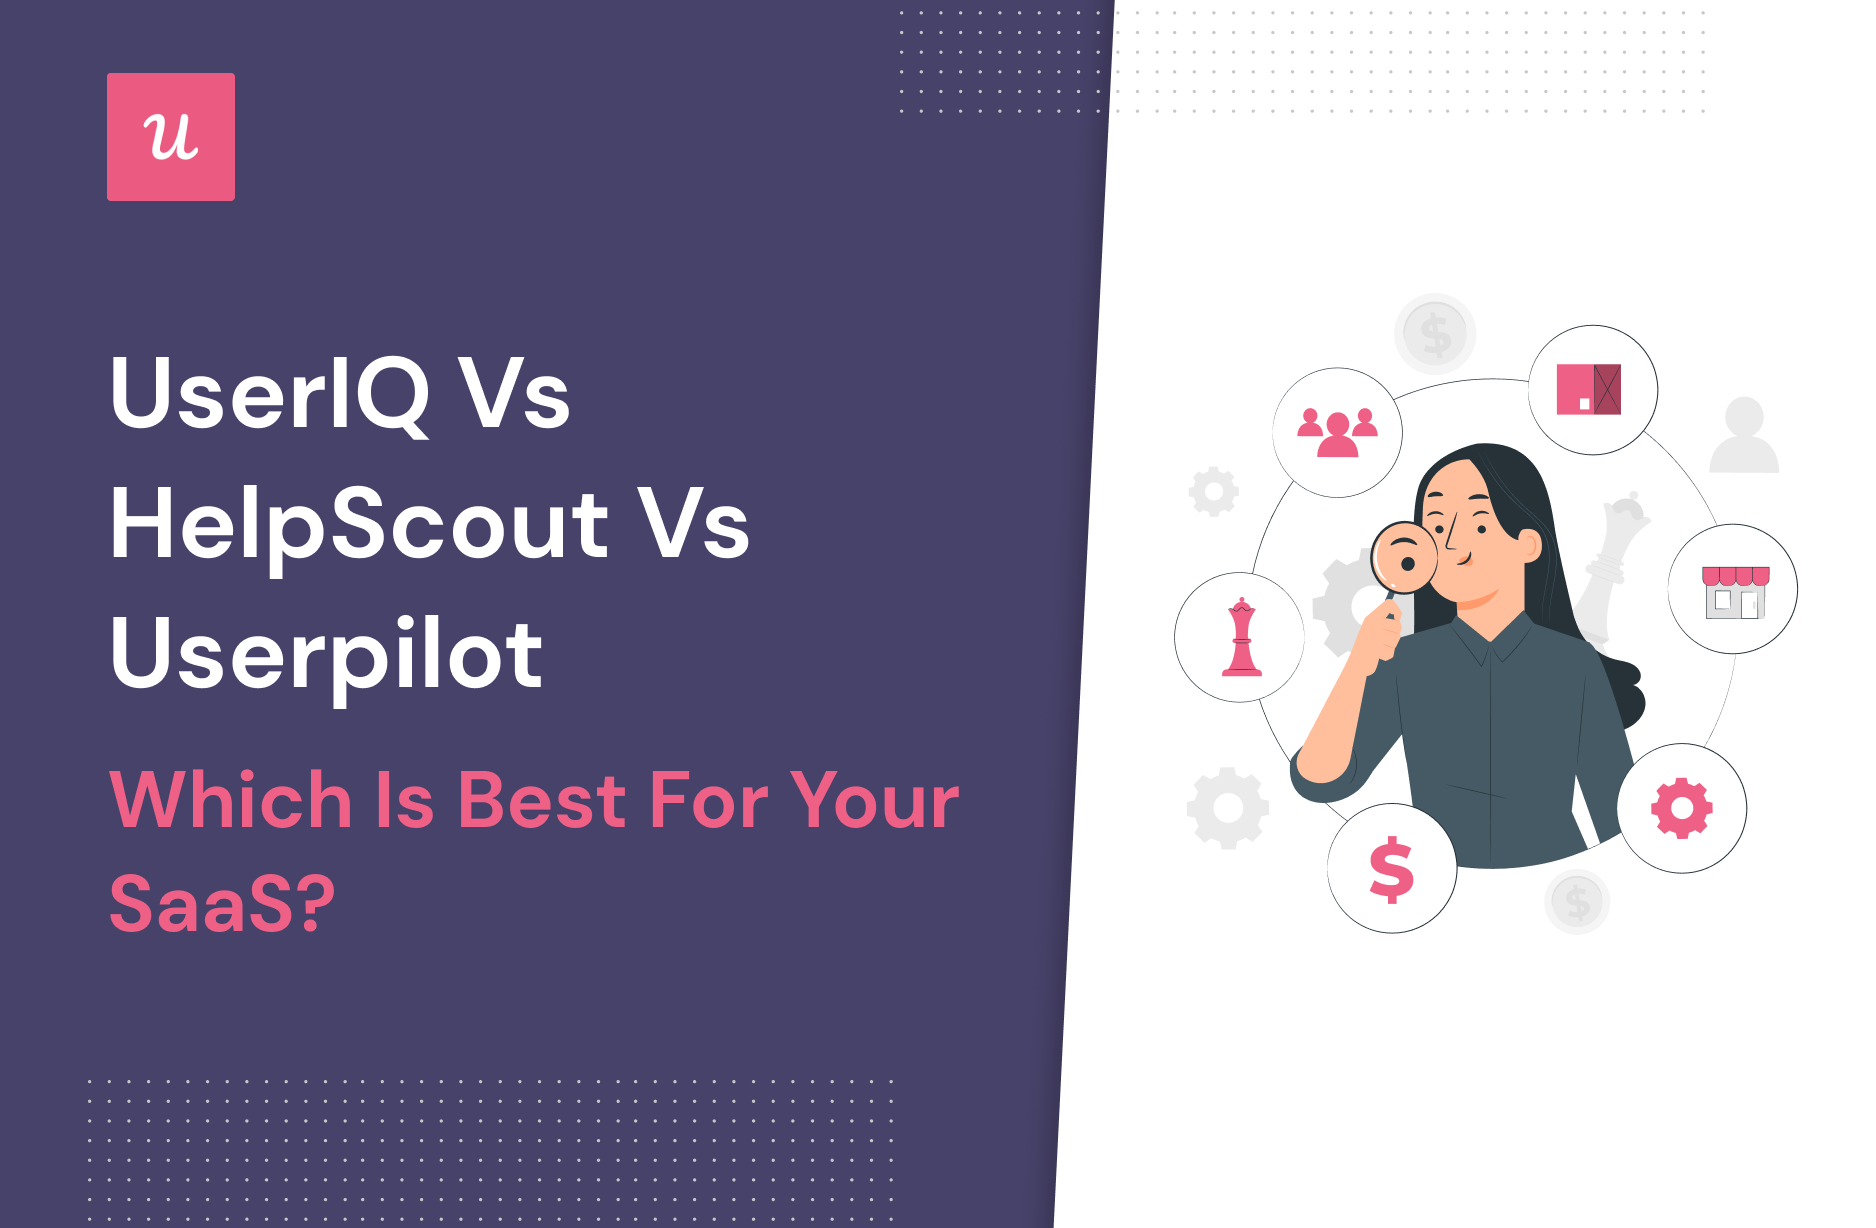 UserIQ vs HelpScout vs Userpilot – Which is Best for Your SaaS